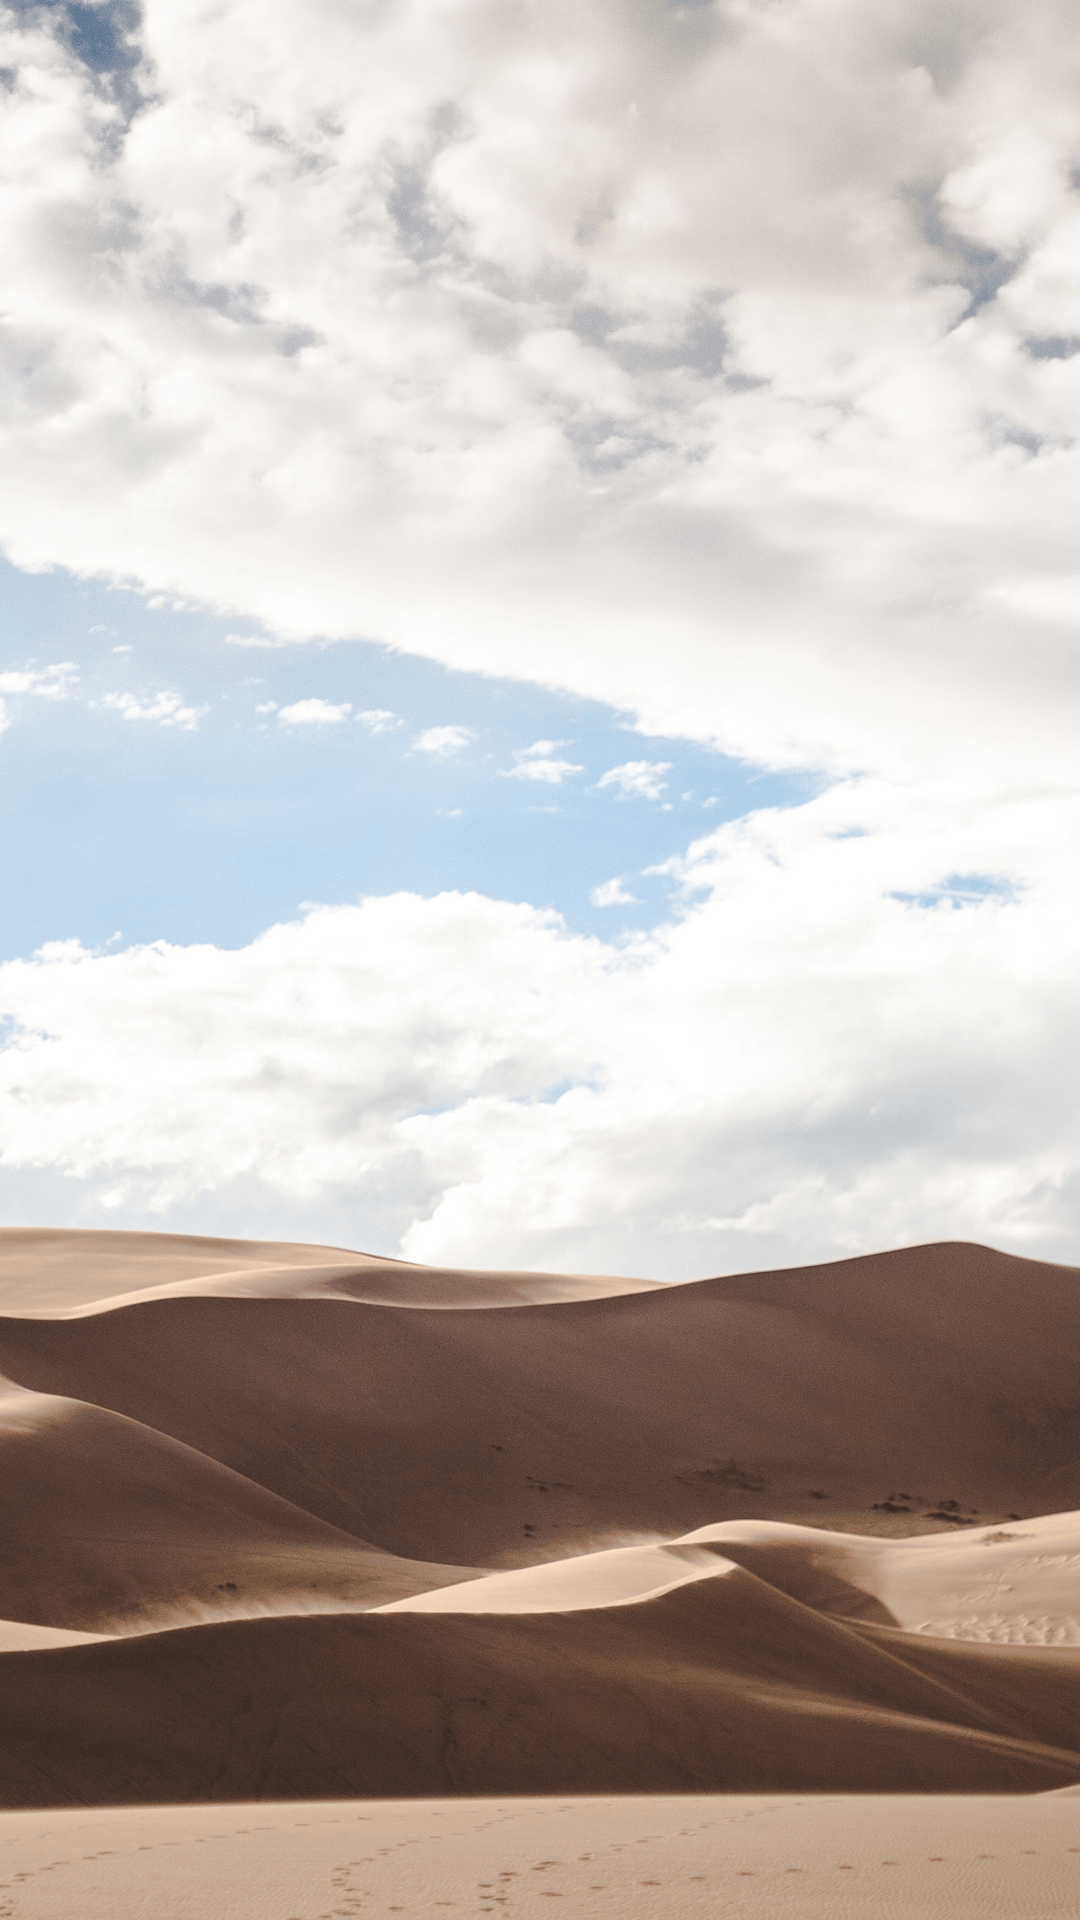 Ultra HD Dunes Of Sand Wallpaper For Your Mobile Phone .0376